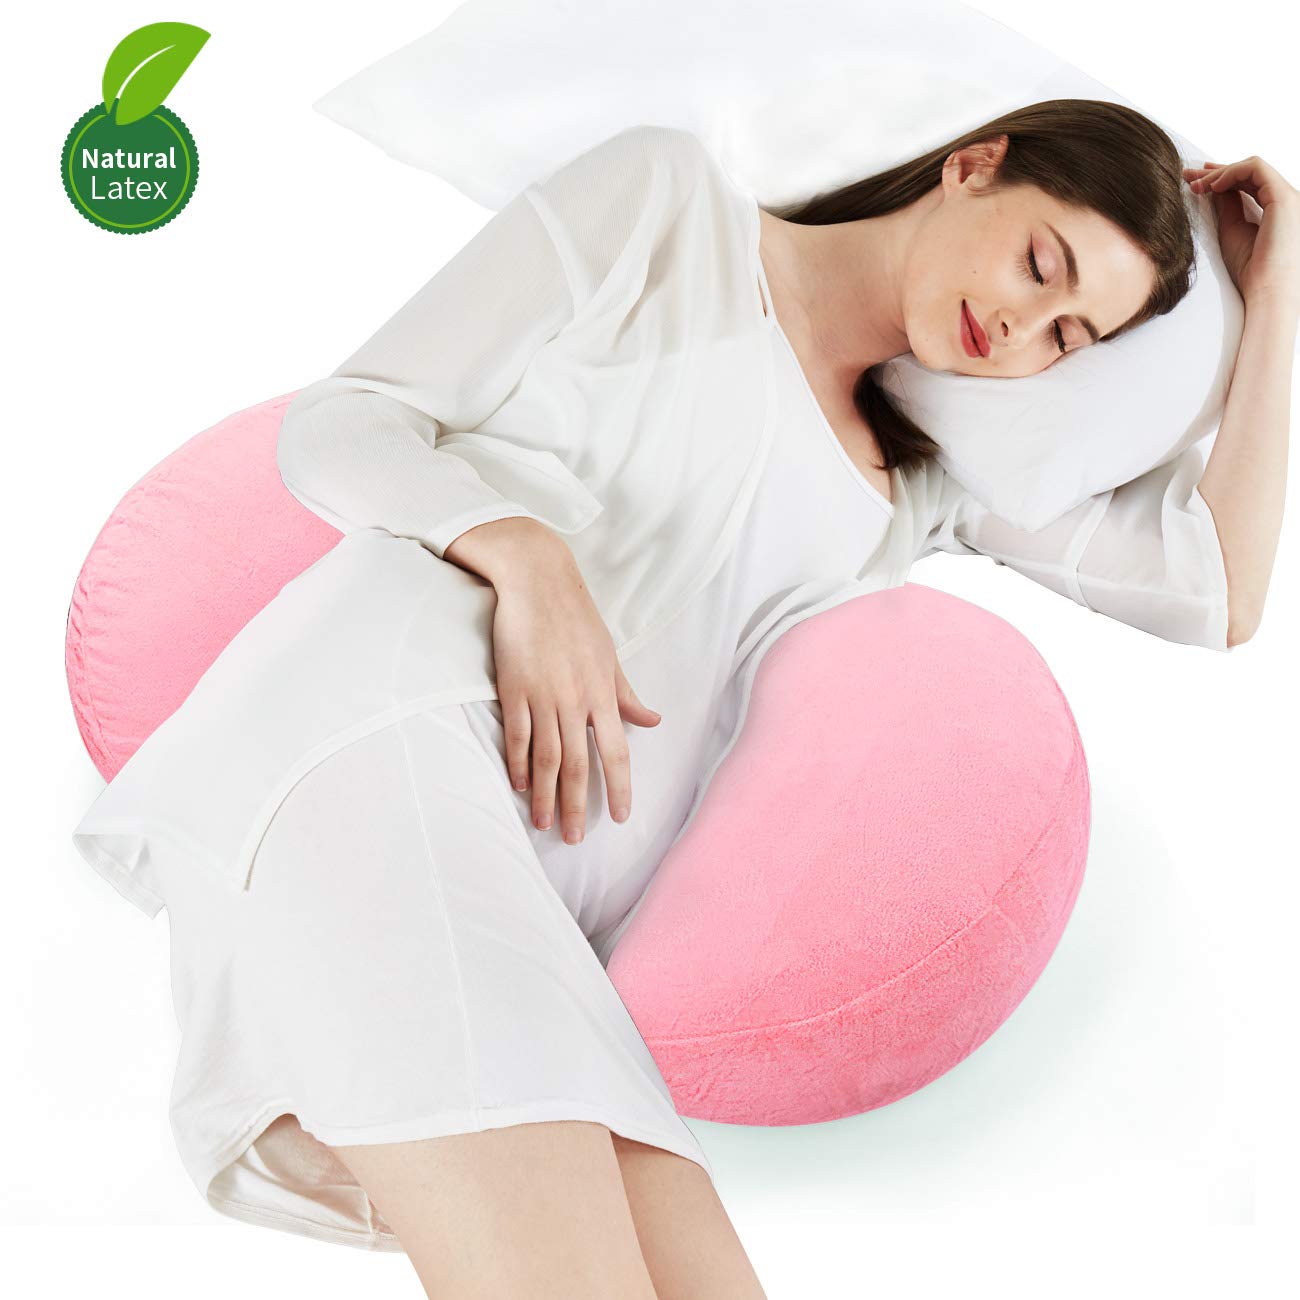 Wedged Pregnancy Pillow